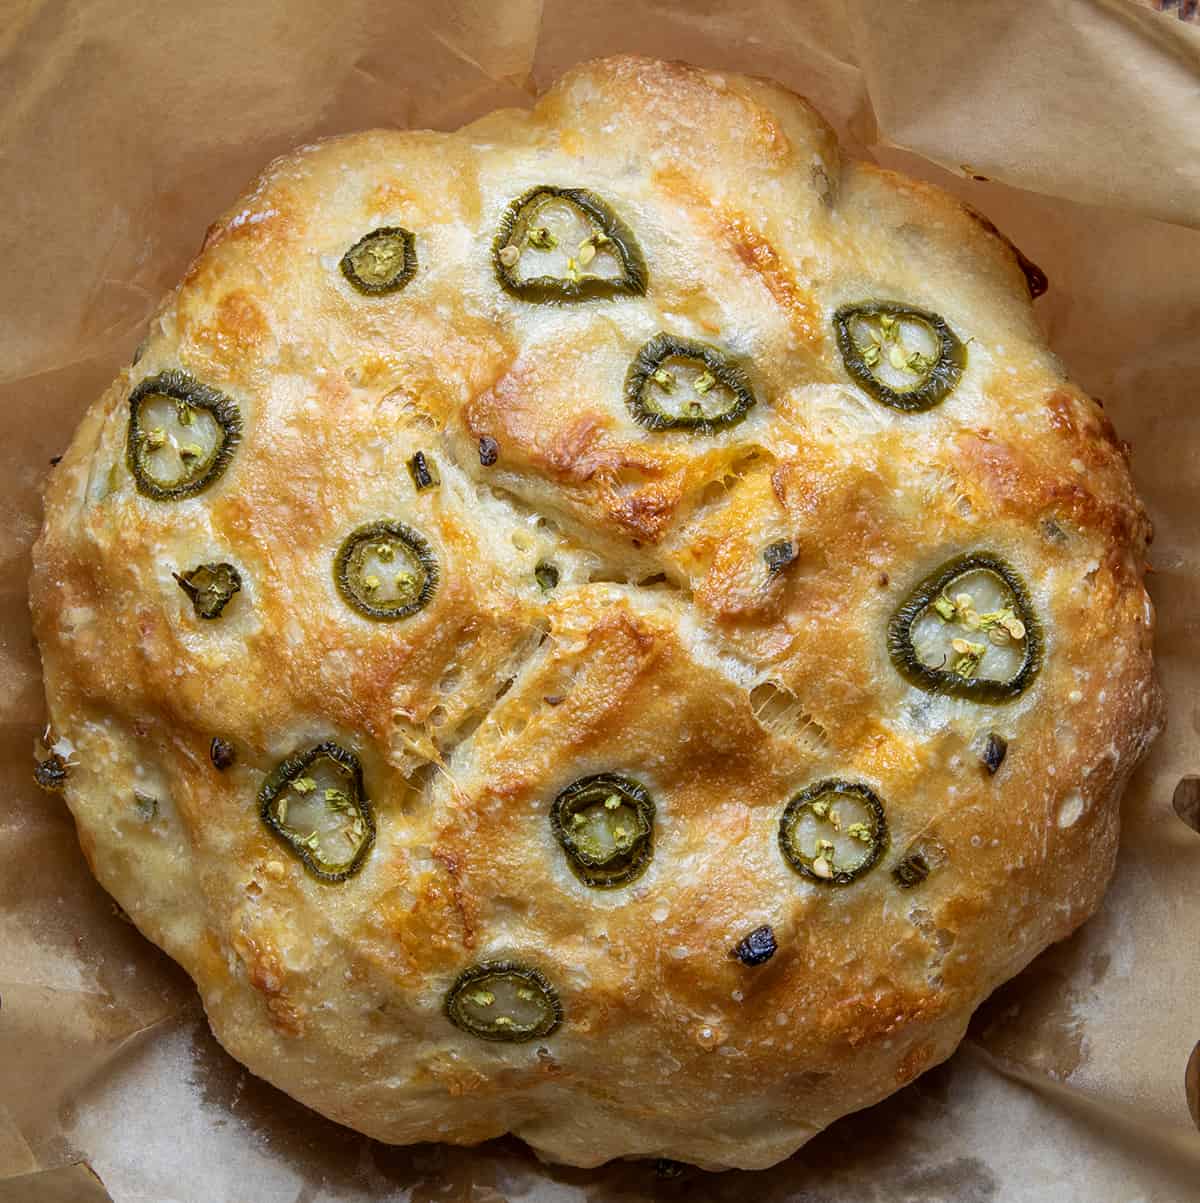 Loaf of Jalapeno Cheddar Bread on a wooden cutting board